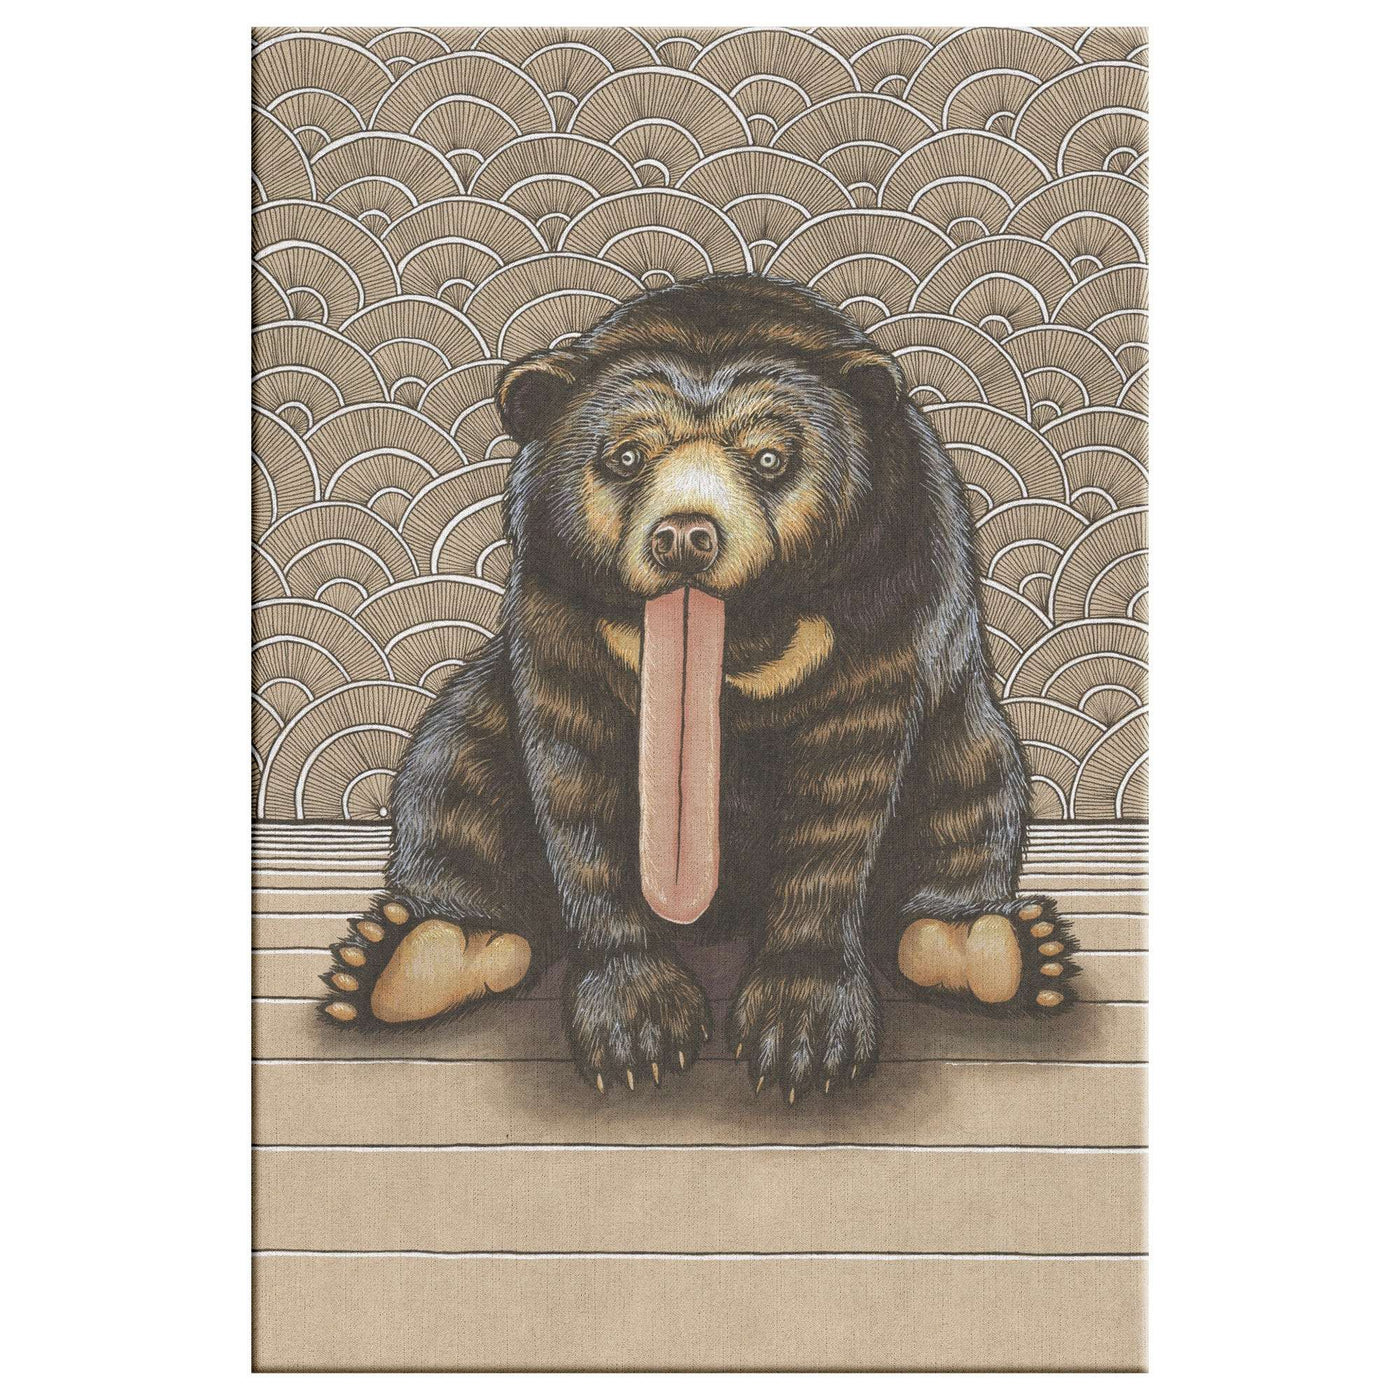 A Canvas Art Print of a sun bear sticking out it's tongue and sitting on the ground, set against a patterned background of wave-like shapes.